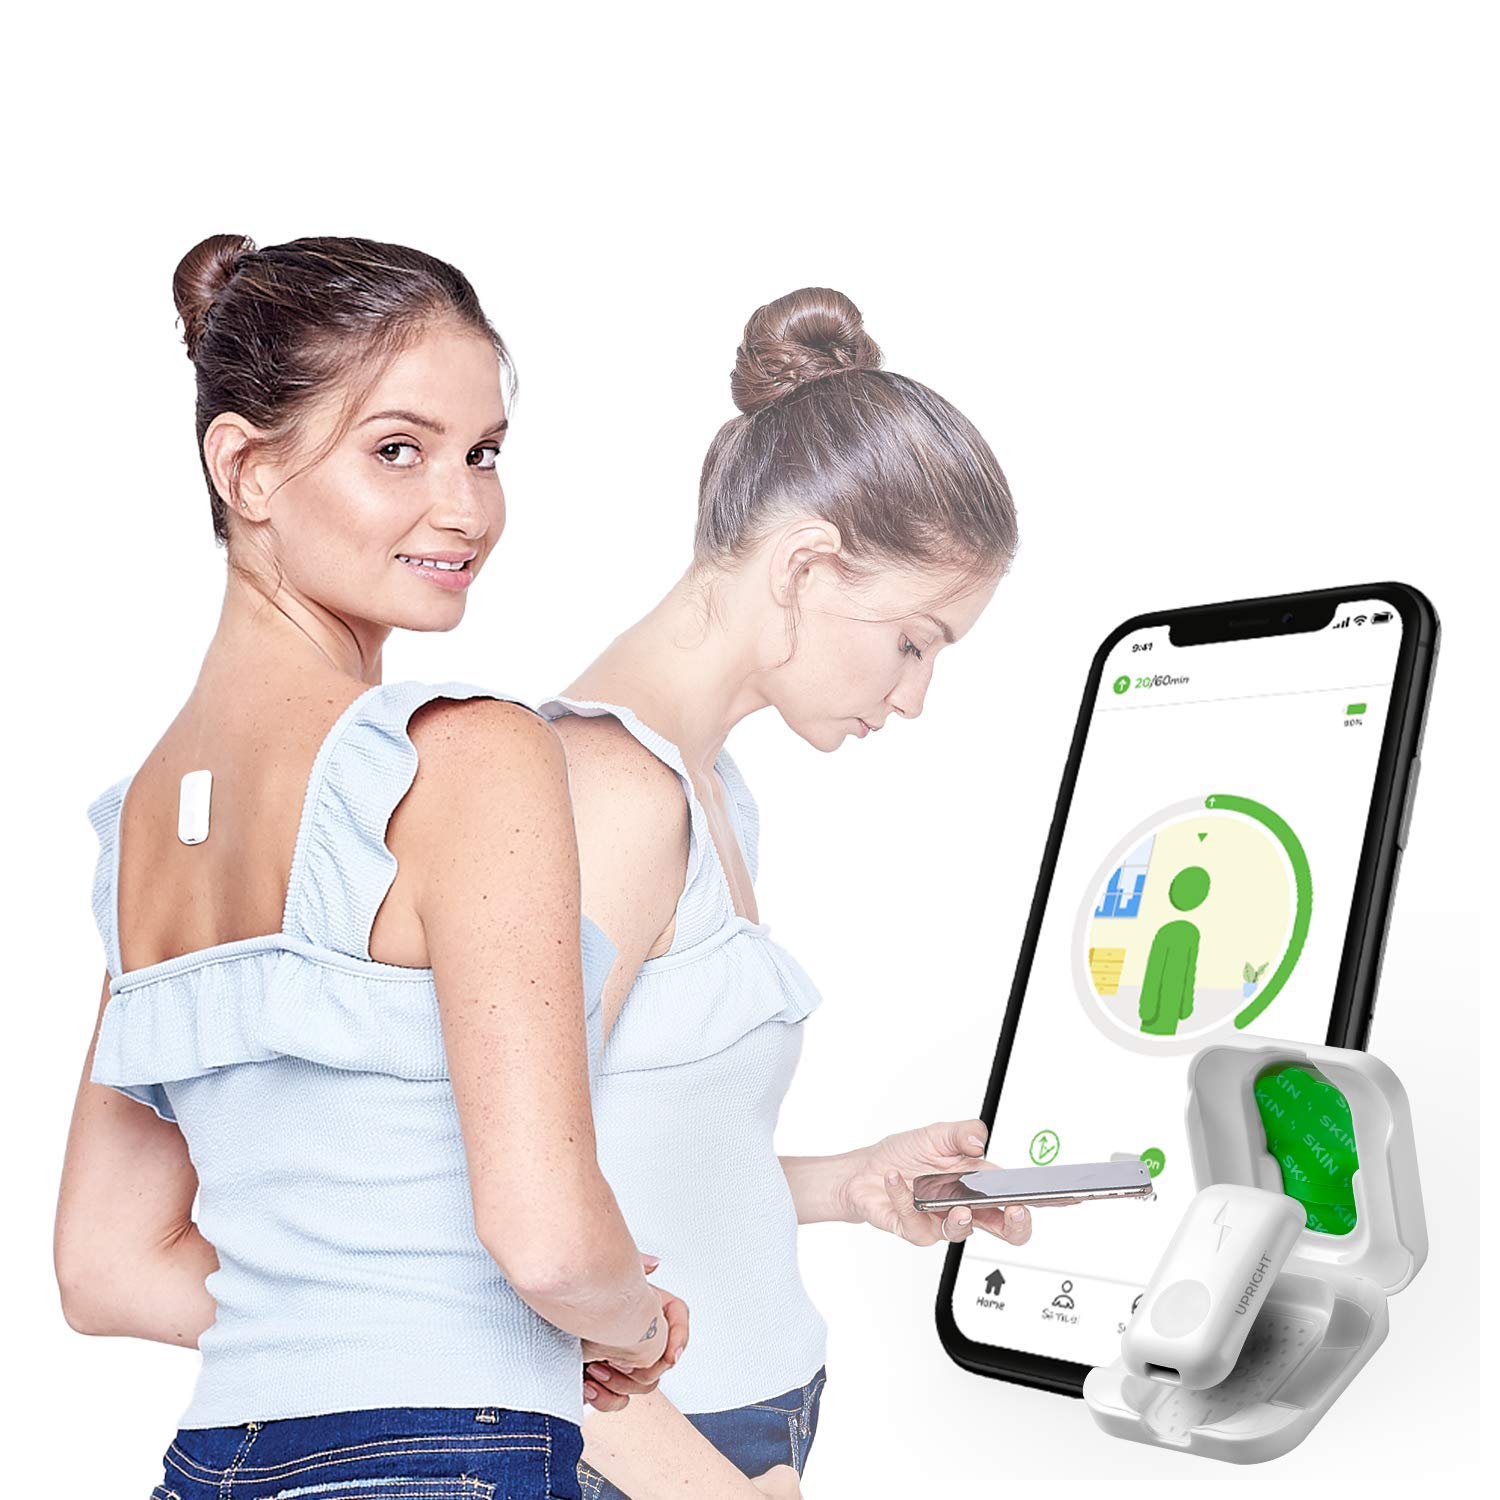 The Upright Go, posture and pain. We review the claims and evidence 